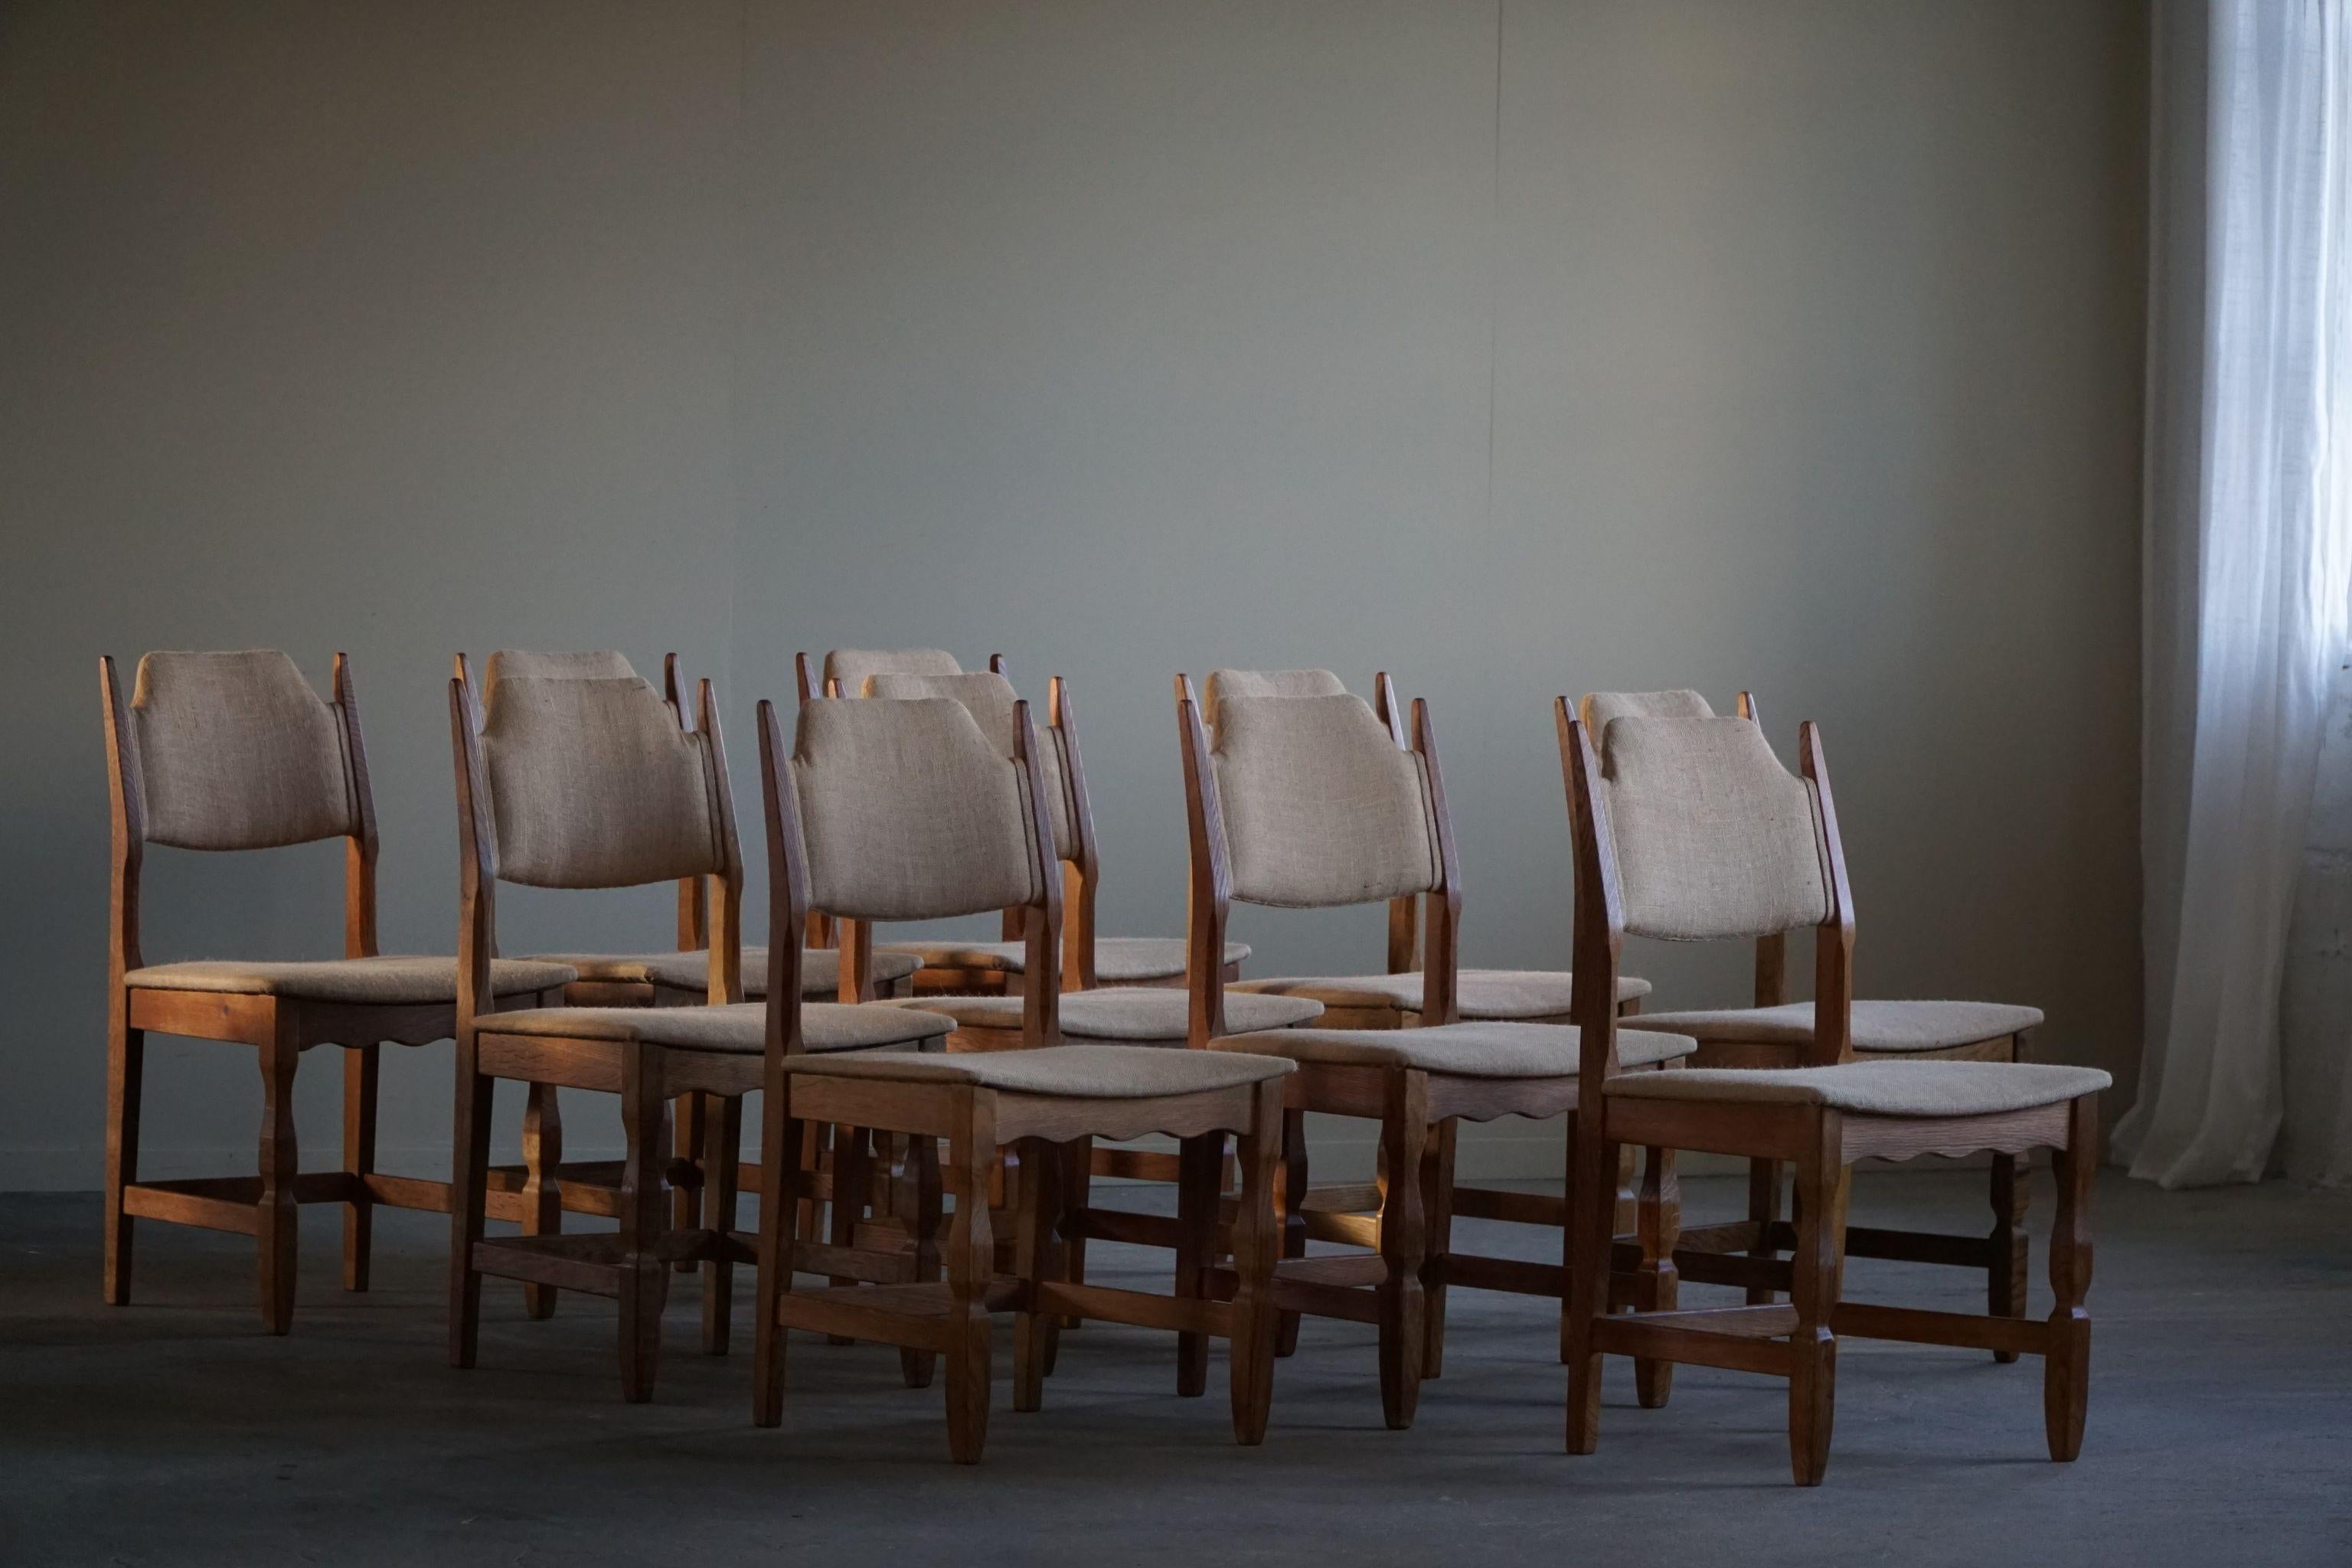 An incredible set of 10 dining chairs in oak, seat & back reupholstered in a organic hessian, adding a touch of rustic charm while ensuring comfort and durability. This set is in the series of the popular 